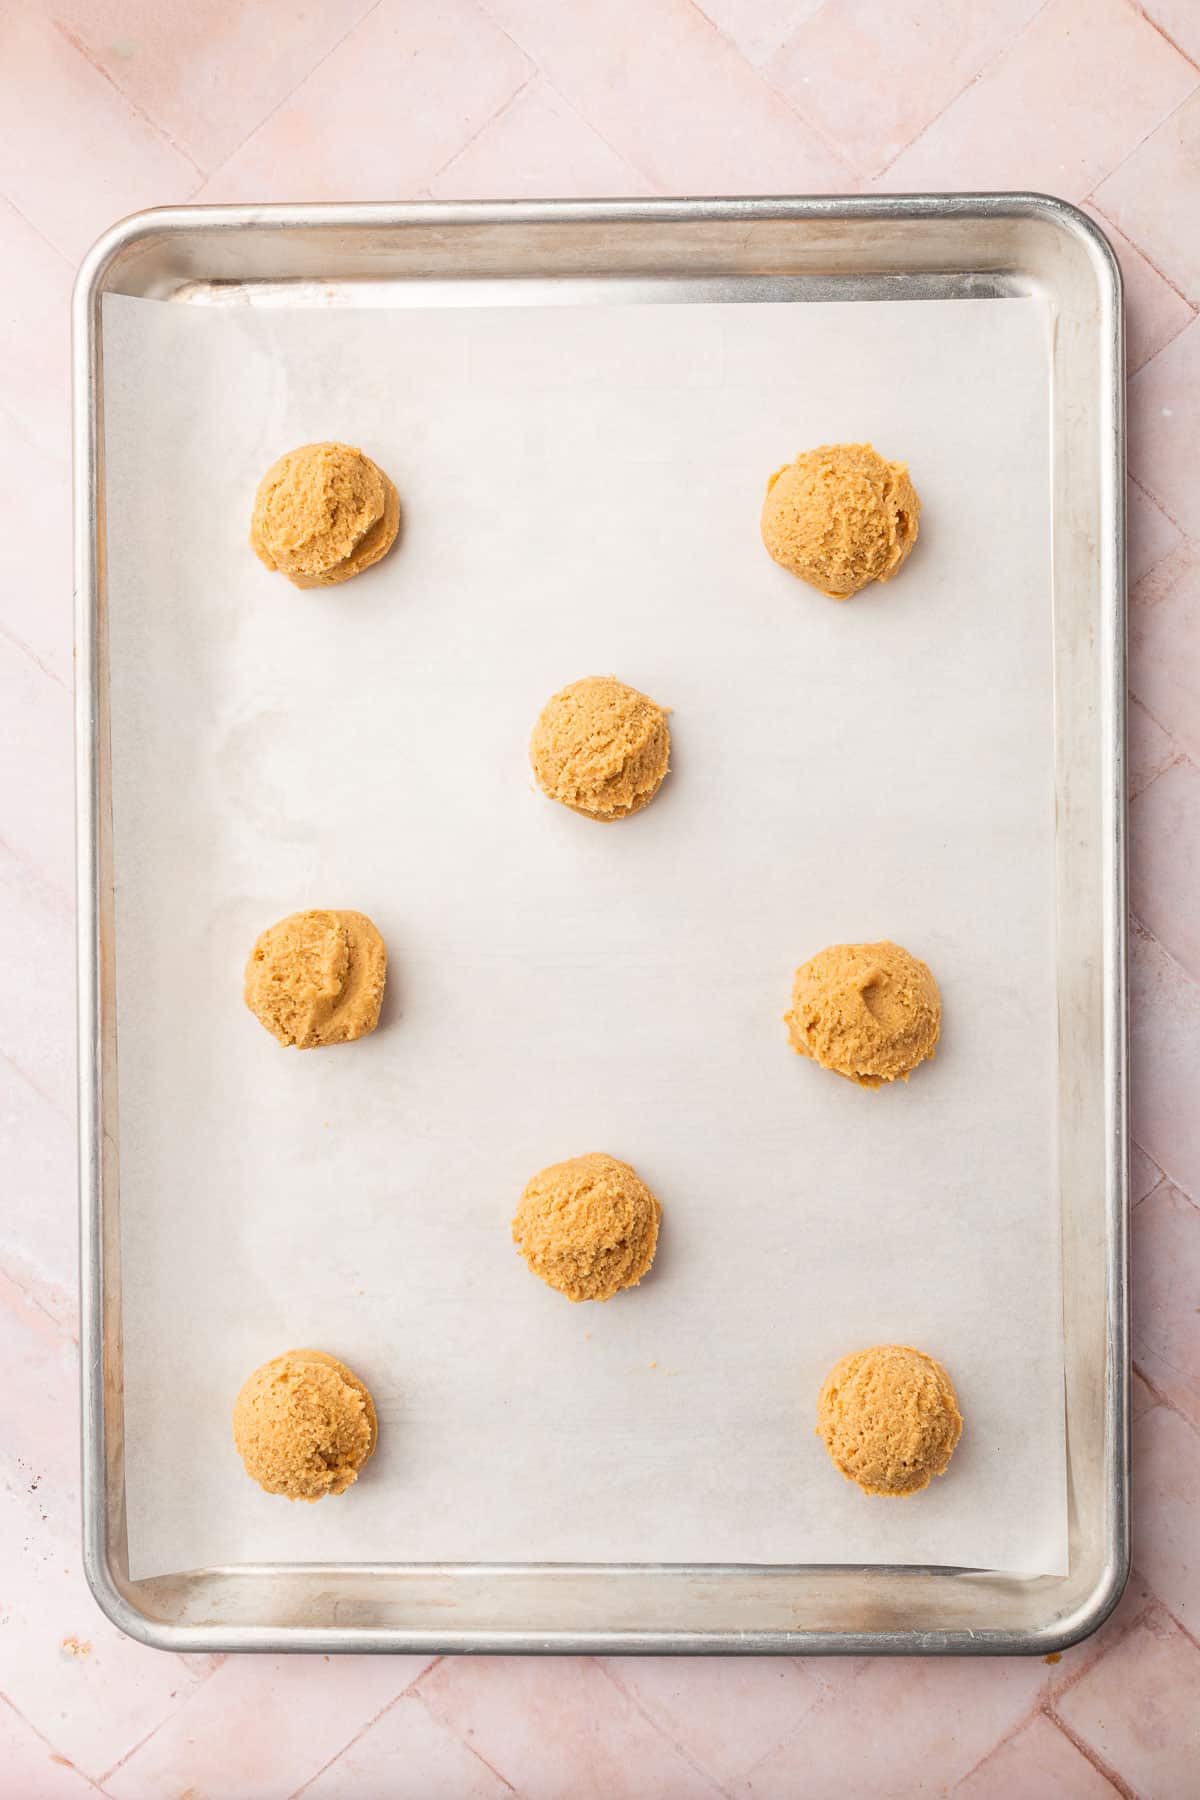 Eight balls of gluten-free peanut butter cookie dough on a baking sheet lined with parchment paper.